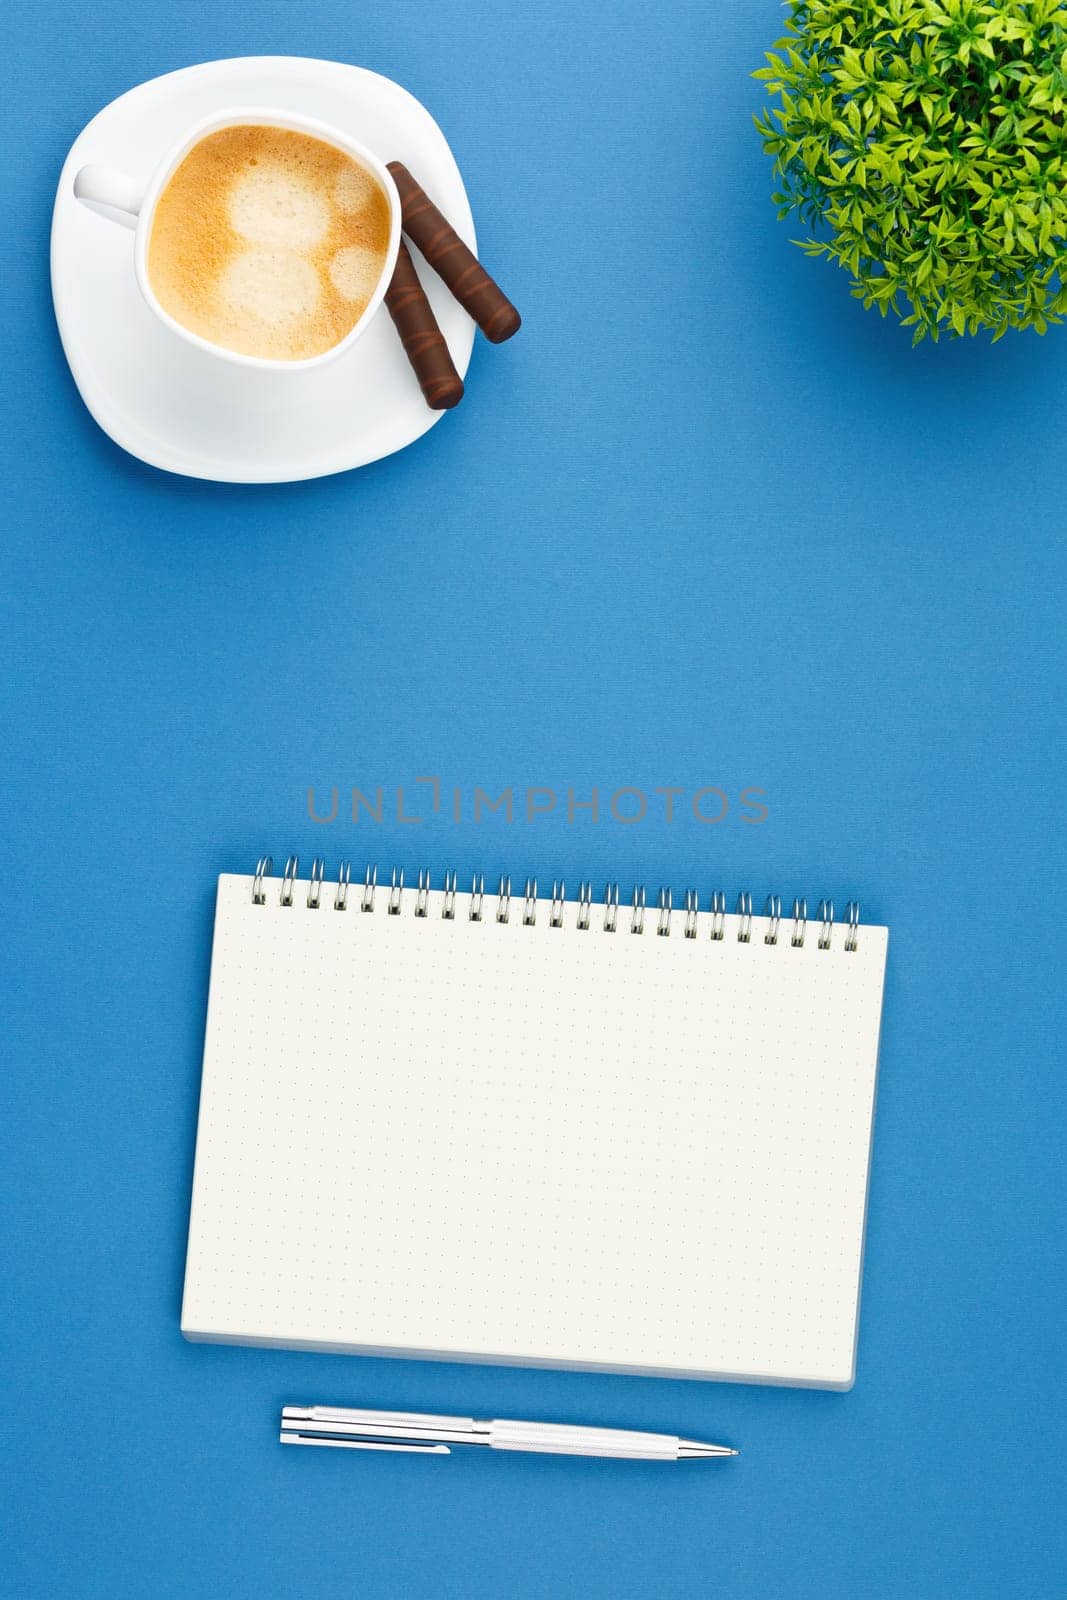 Spiral open notebook with a metal pen, dessert chocolate sweets, cup of coffee and home plant with green leaves on blue background. Flat lay, top view, Vertical photo.